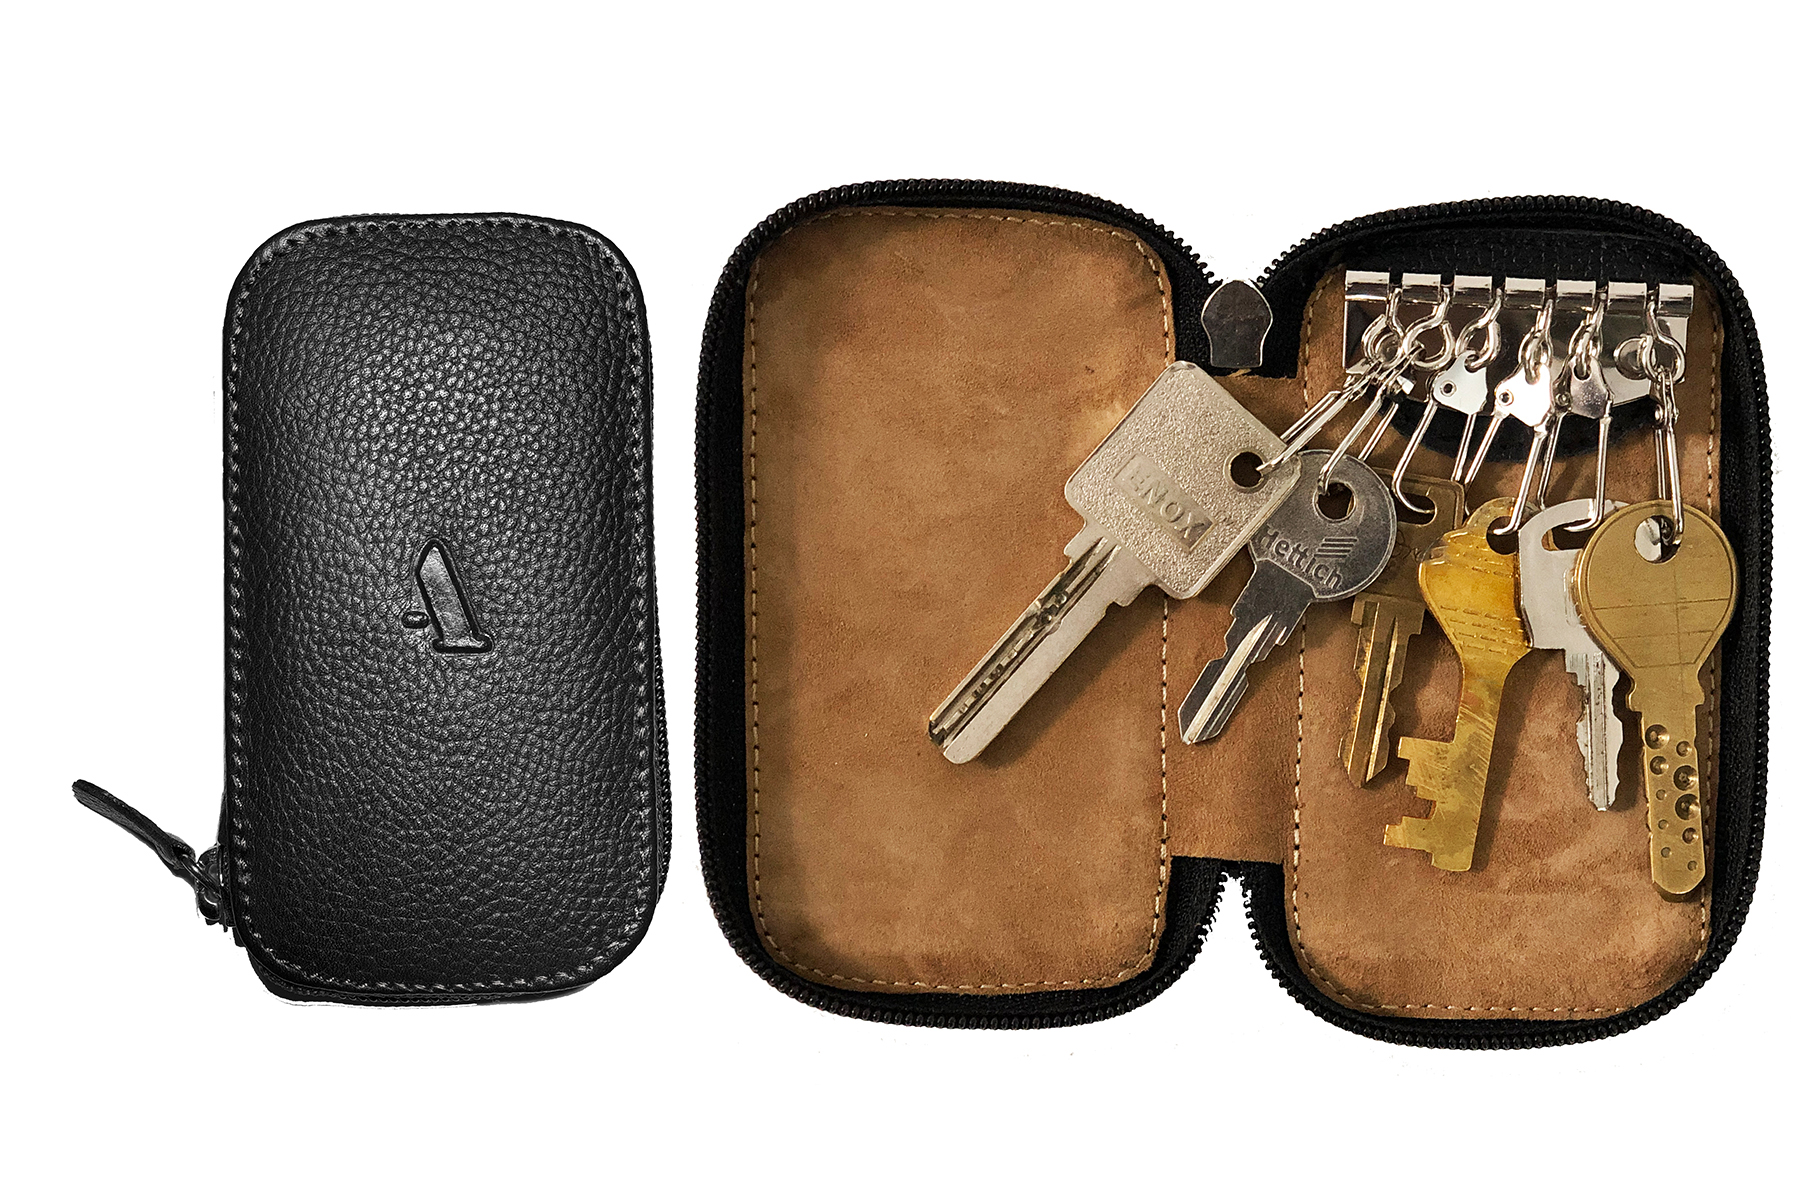 Key Chain--Keycase with zipper closing in Genuine Leather - Black